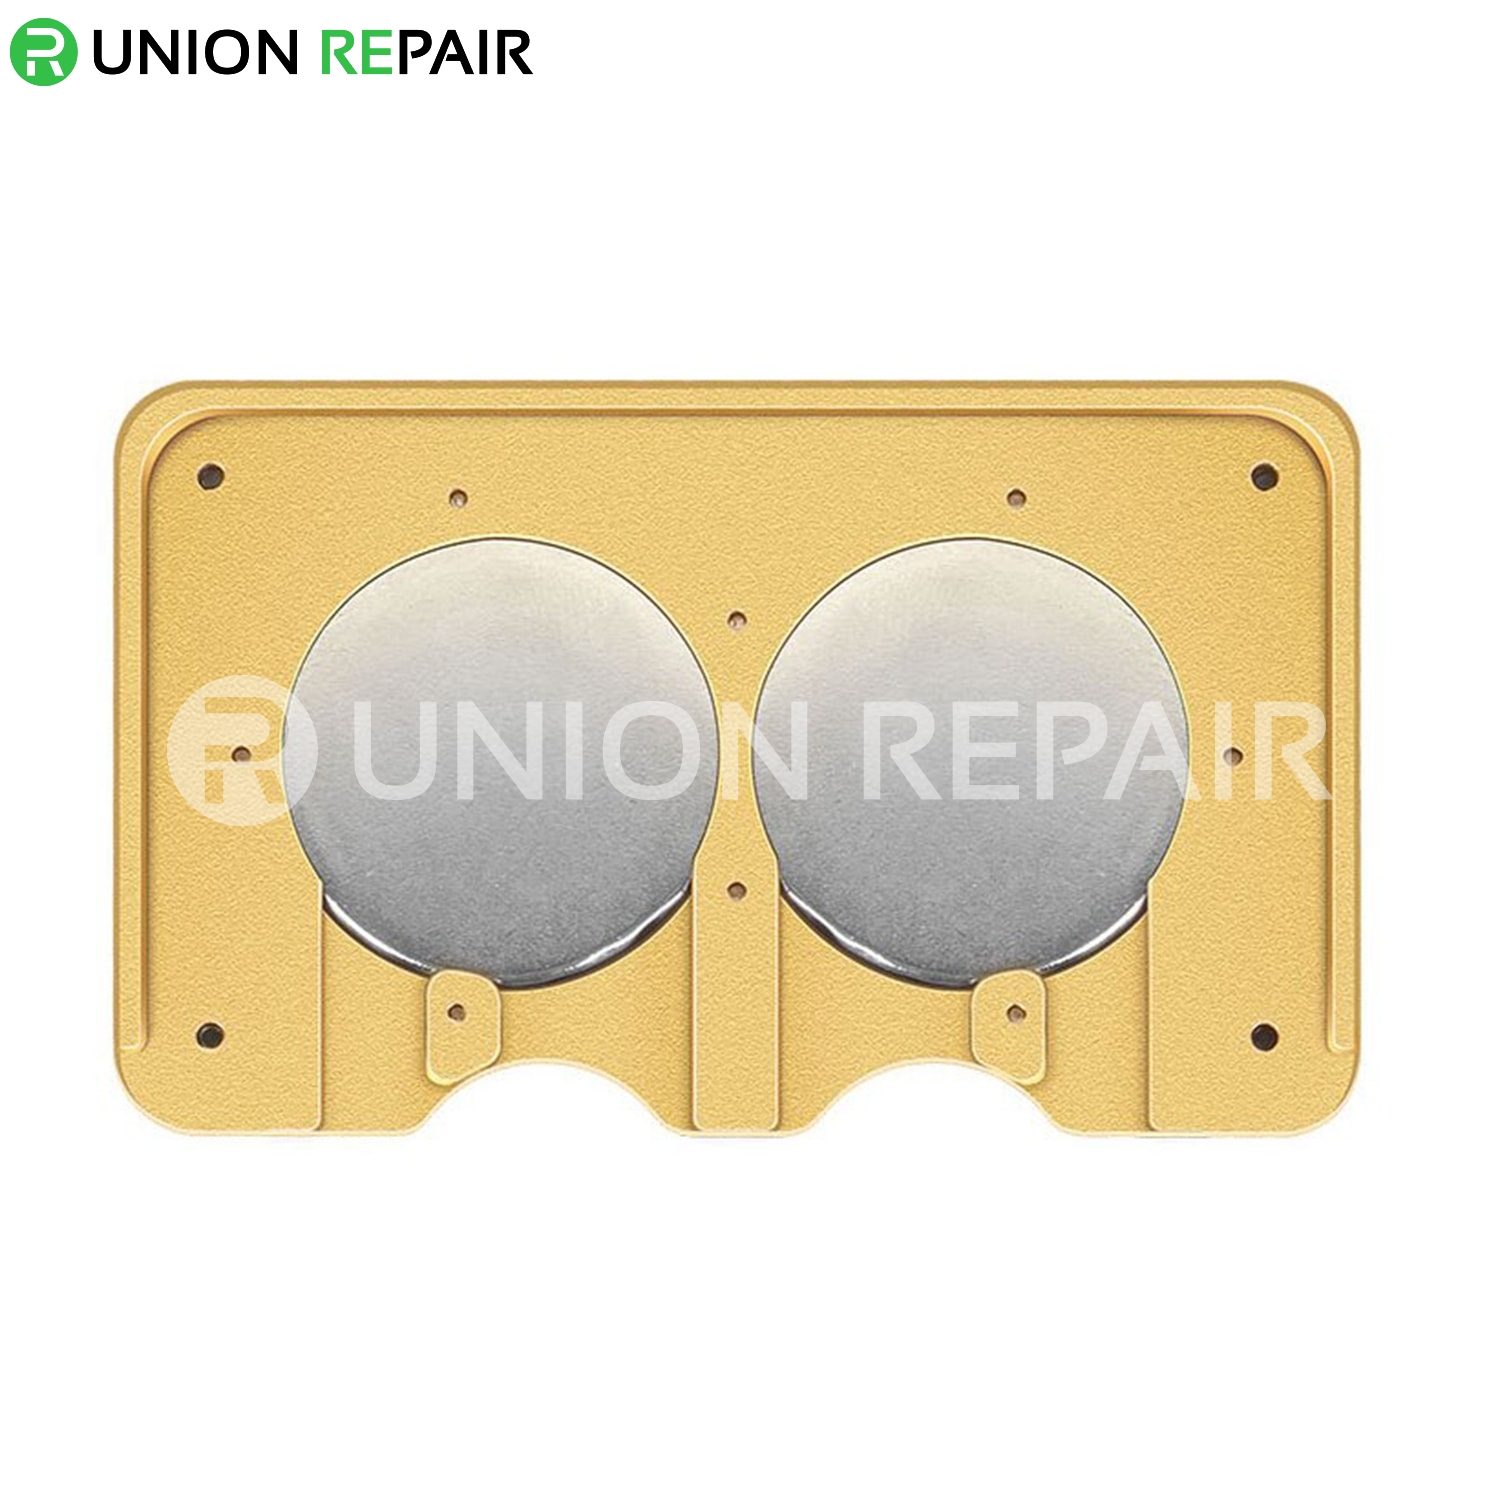 WL 2 in1 CPU NAND BGA Reballing Stencil Platfrom for iPhone 6/6S/7/8/X/XR/XS/XsMax, Condition: Universal Base